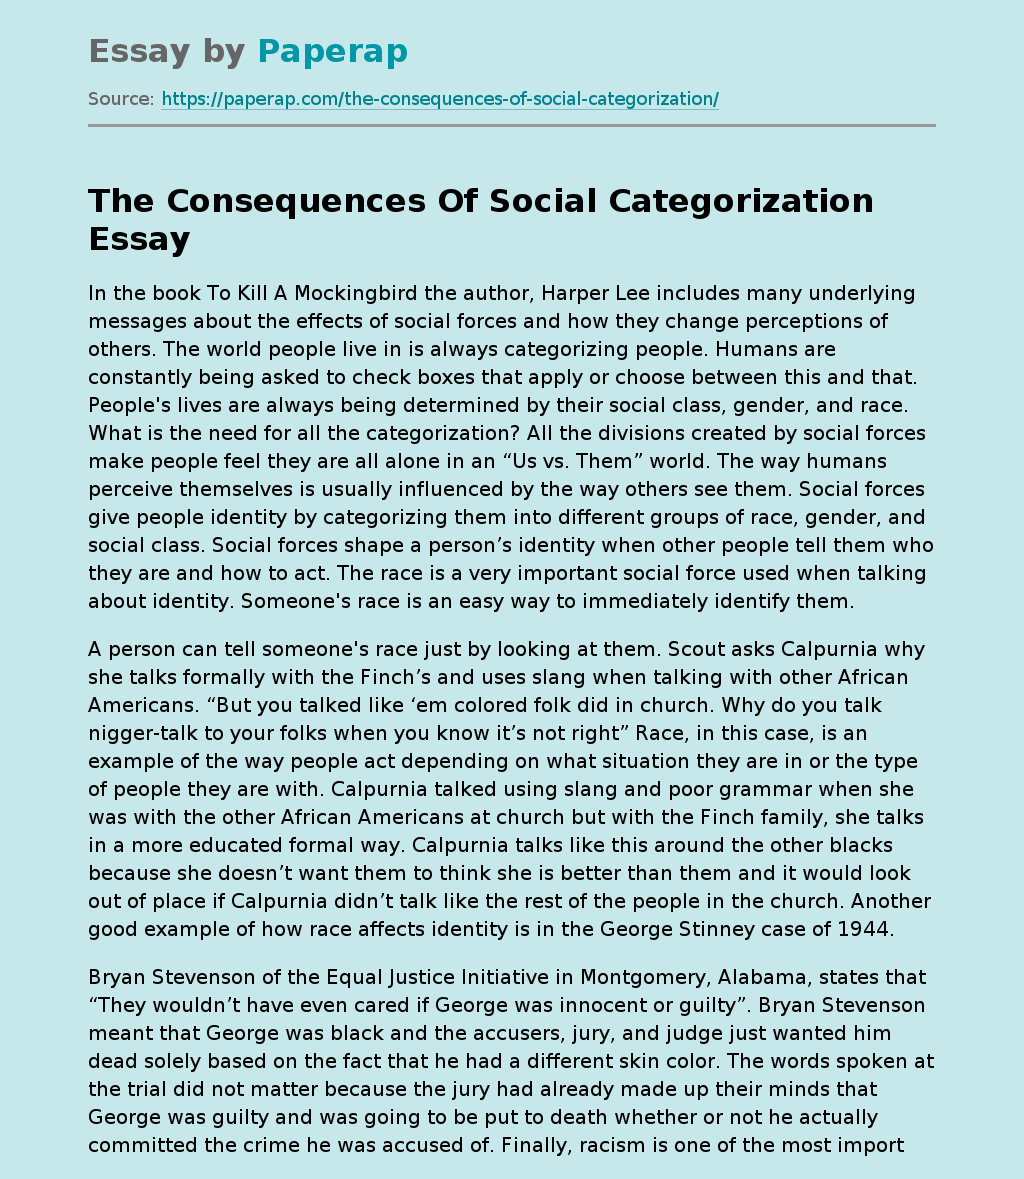 The Consequences Of Social Categorization